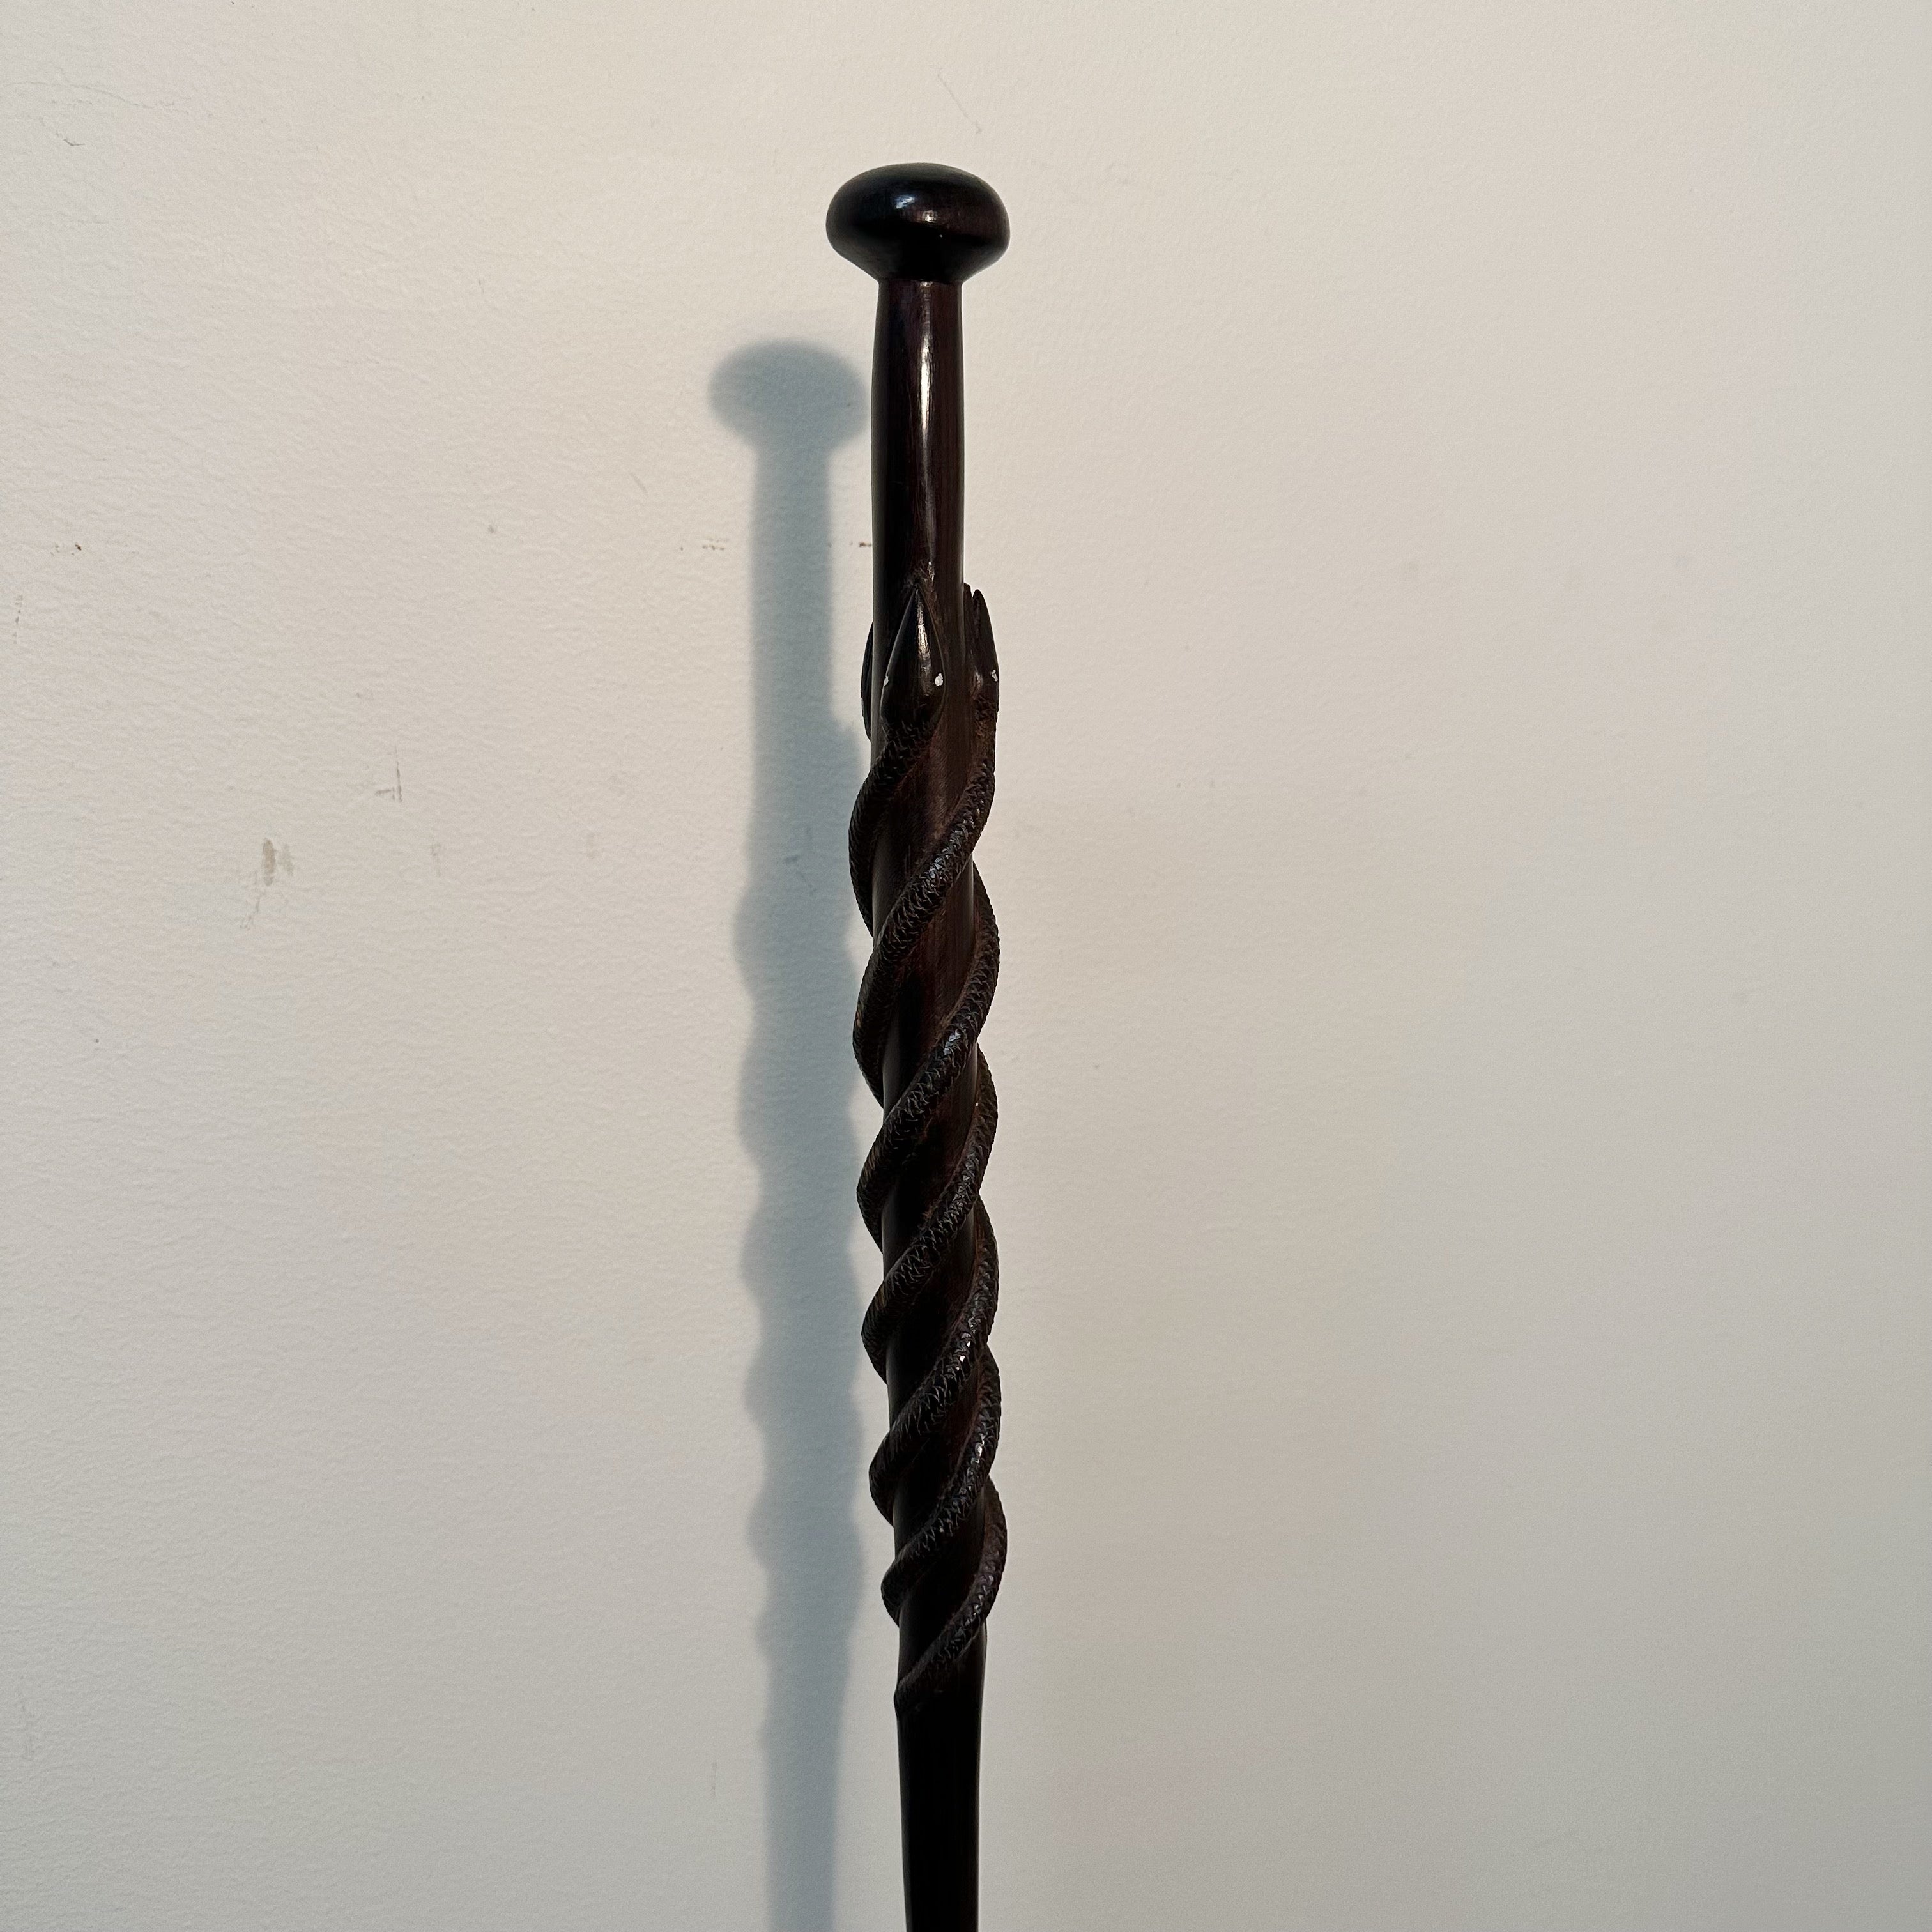 Reserved Antique Zulu Prestige Staff with Triple Twisted Snakes | South Africa